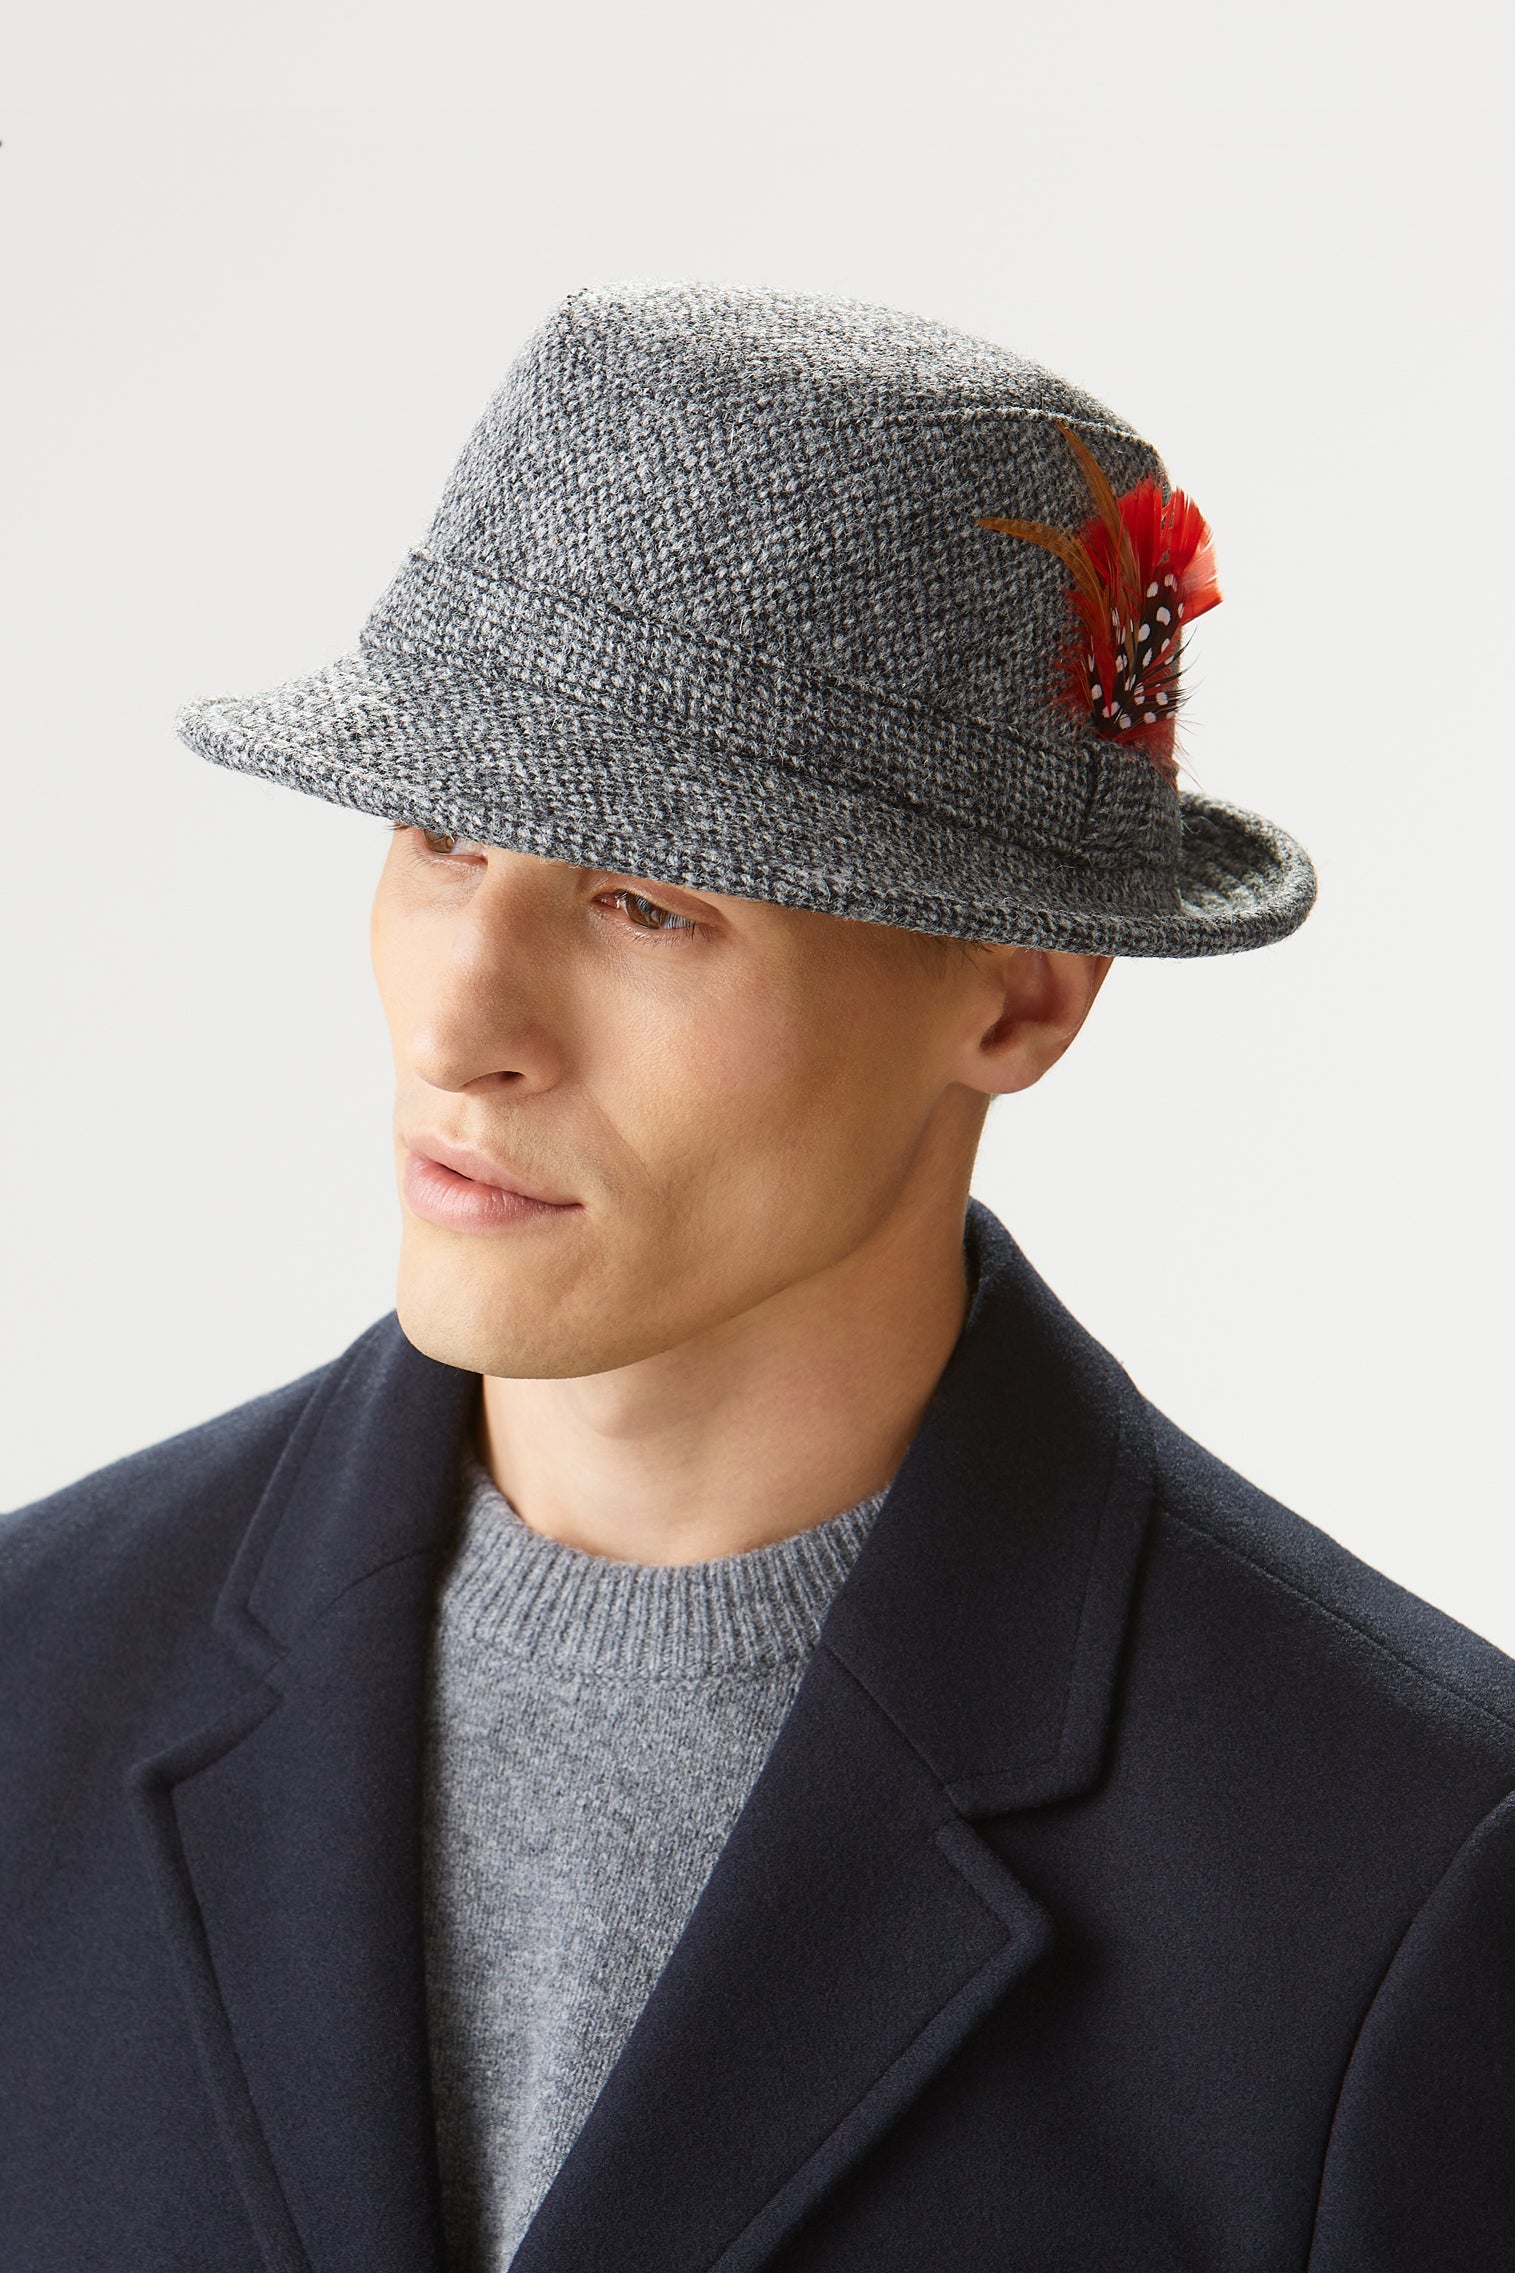 Grouse Tweed Rollable Hat - Packable & Rollable Hats - Lock & Co. Hatters London UK